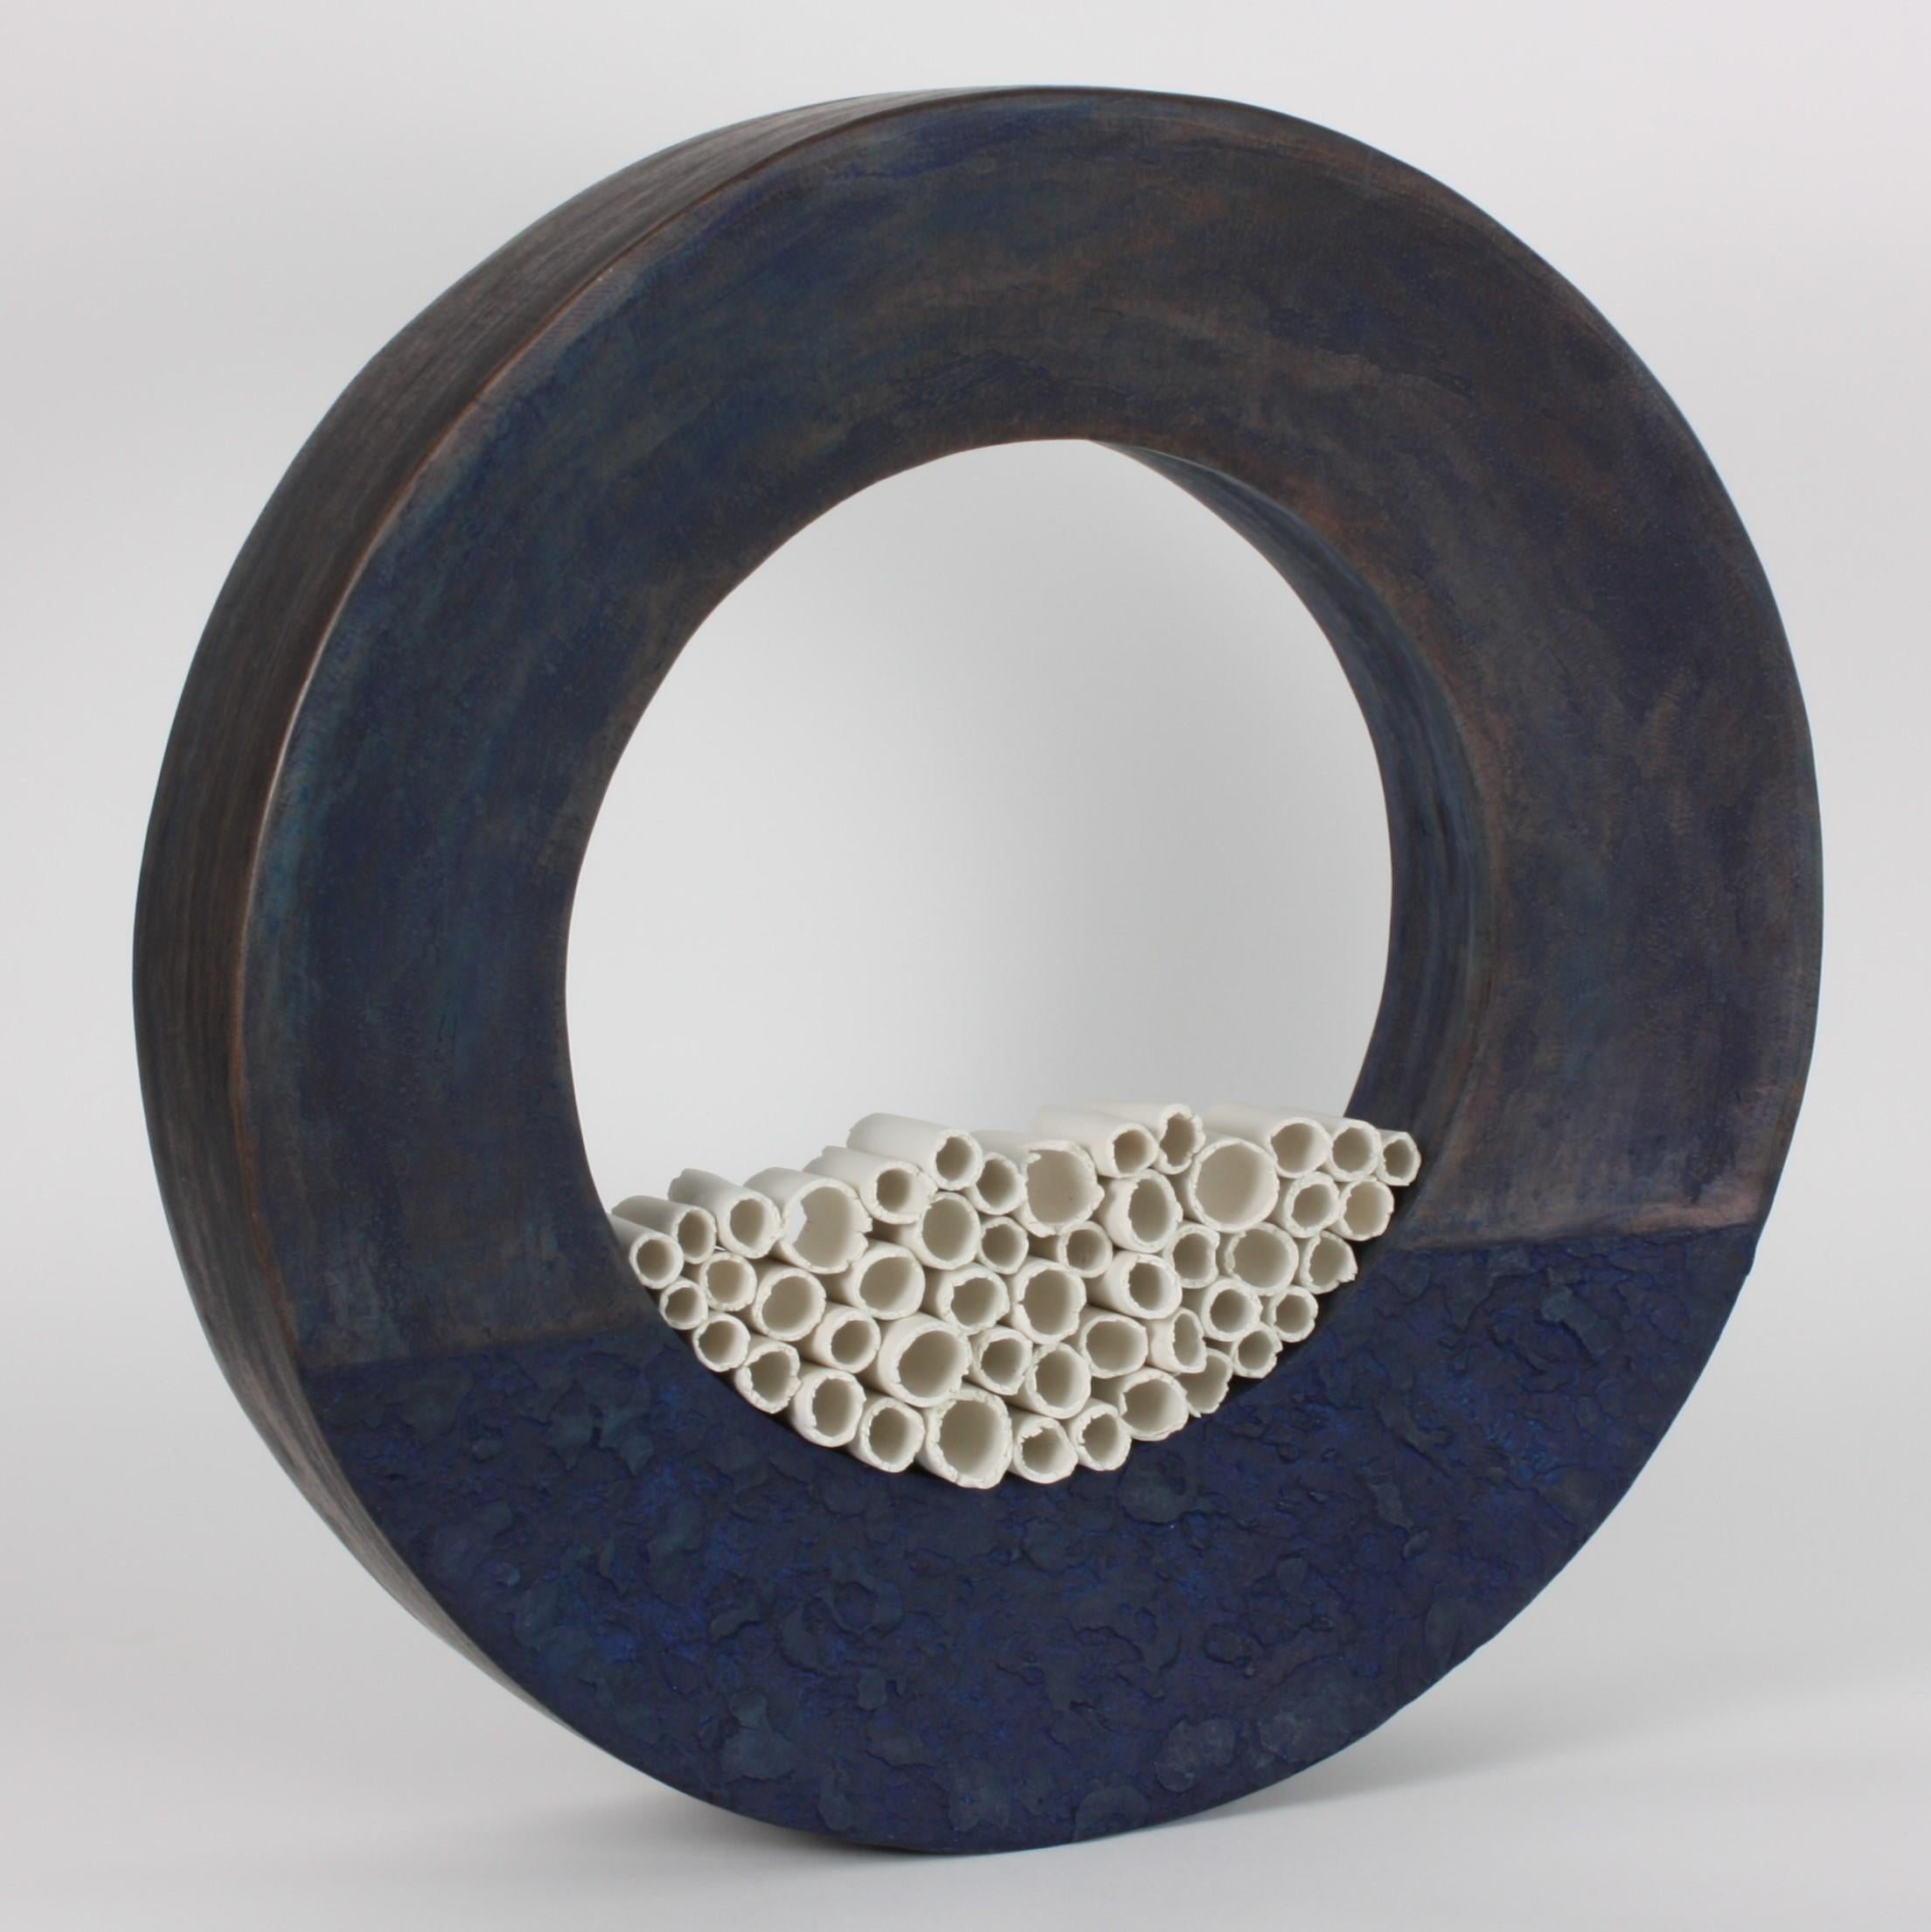 This contemporary blue ceramic ring sculpture in earthenware and porcelain is an exceptional piece. A composition of irregular silken porcelain tubes, suggestive of parchment or papyrus scrolls, are assembled inside a dark blue matte ring with rich